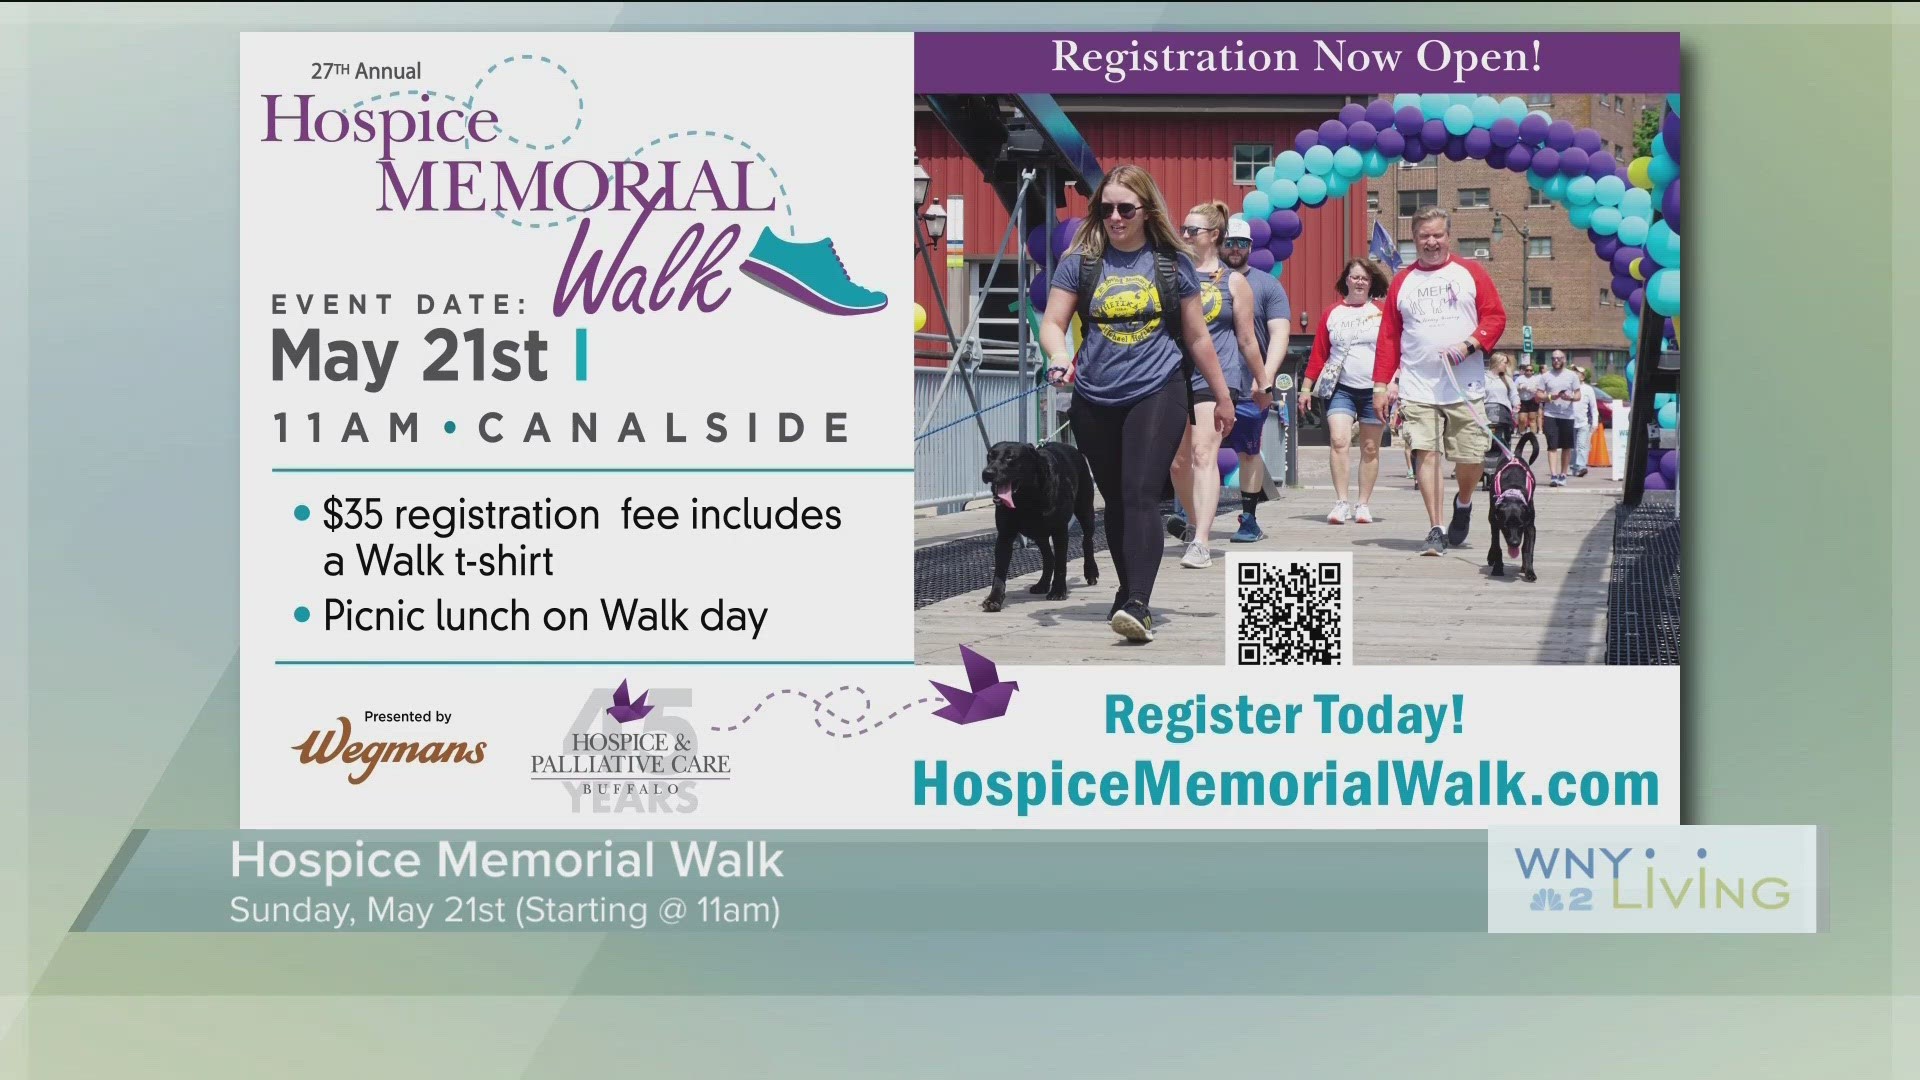 May 13th -WNY Living -  Hospice Memorial Walk (THIS VIDEO IS SPONSORED BY BUFFALO HOSPICE & PALLIATIVE CARE)